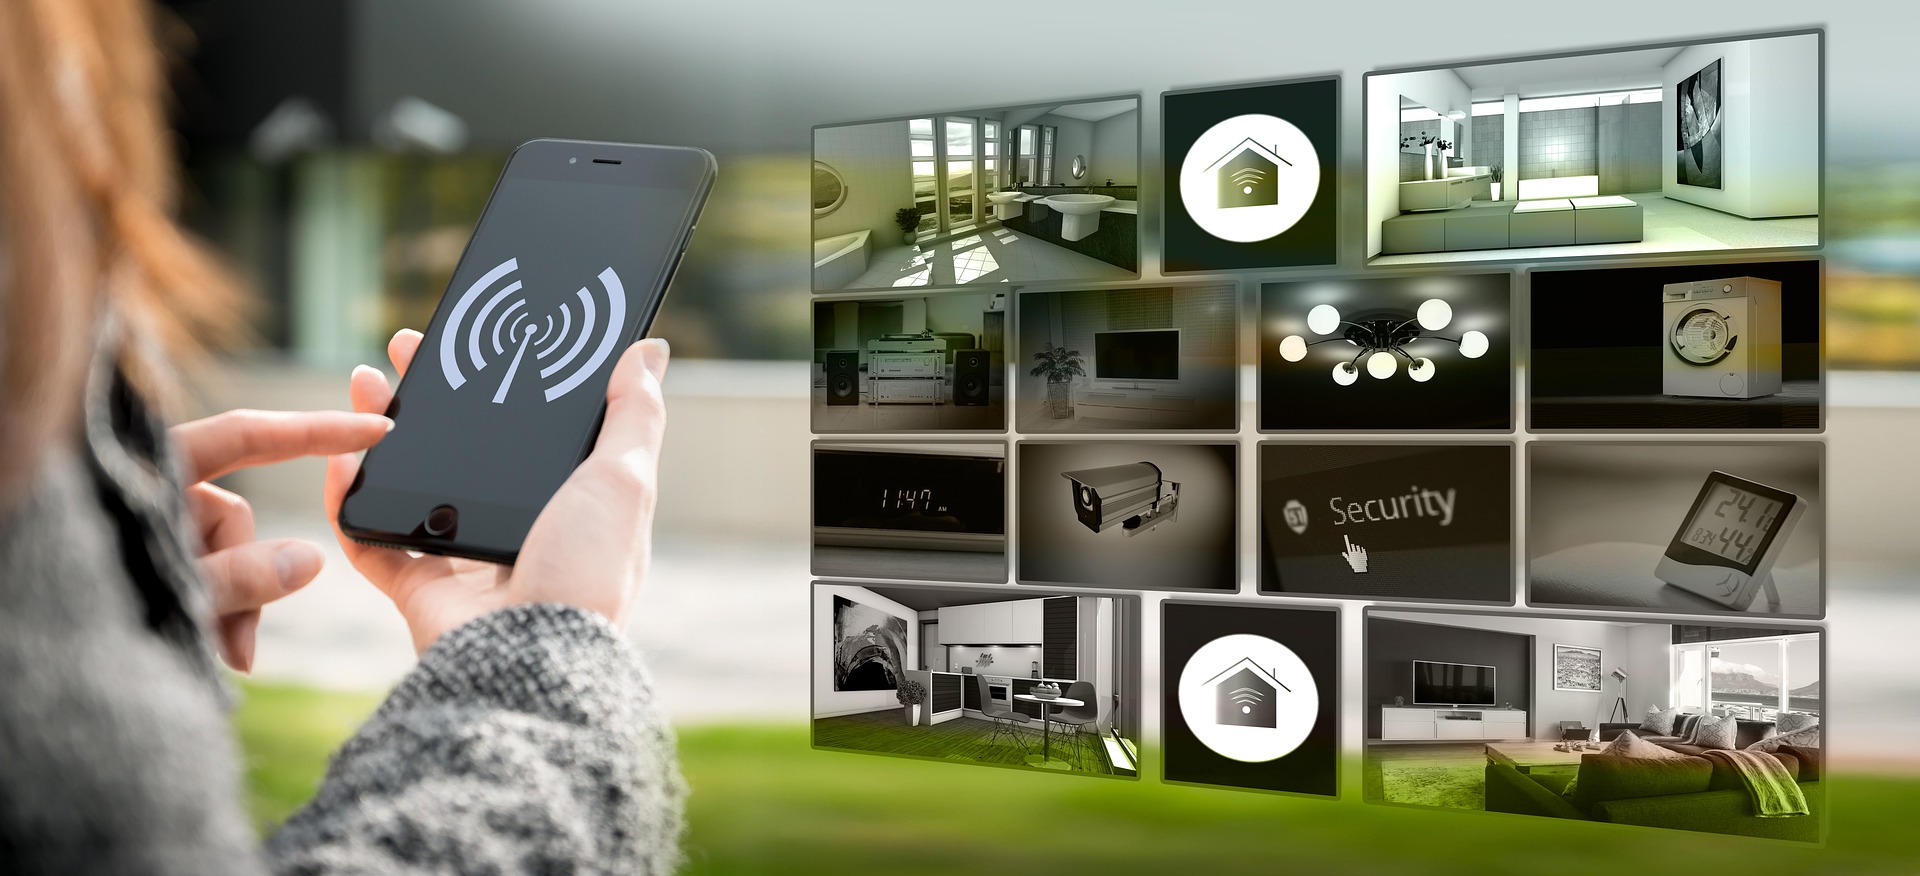 Bespoke Home 2022: Samsung’s Smart Home Strategy Gathers Pace